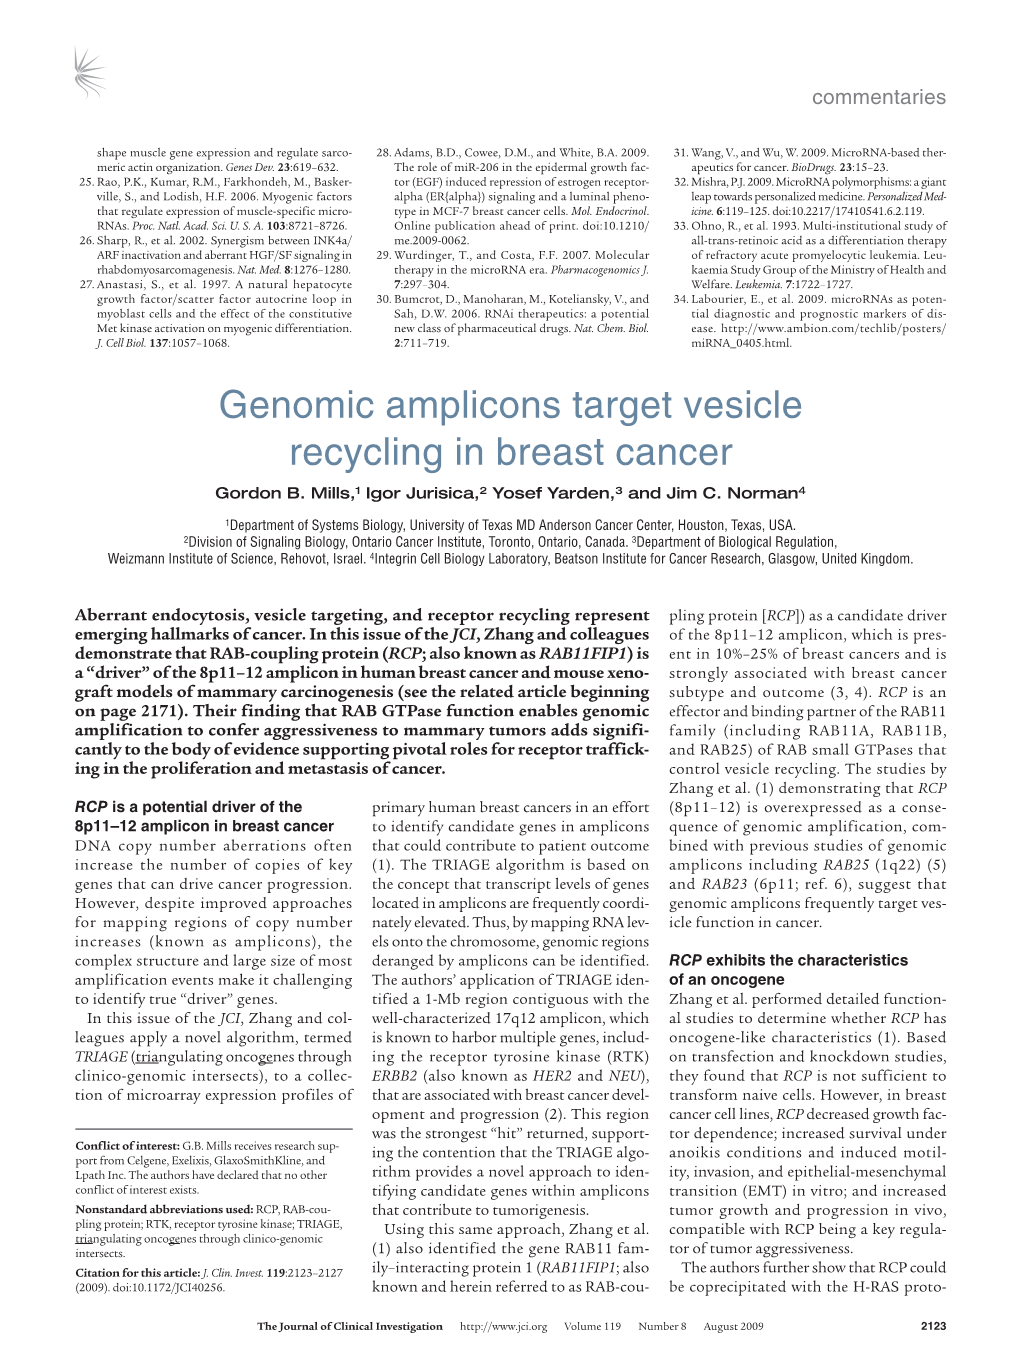 Genomic Amplicons Target Vesicle Recycling in Breast Cancer Gordon B